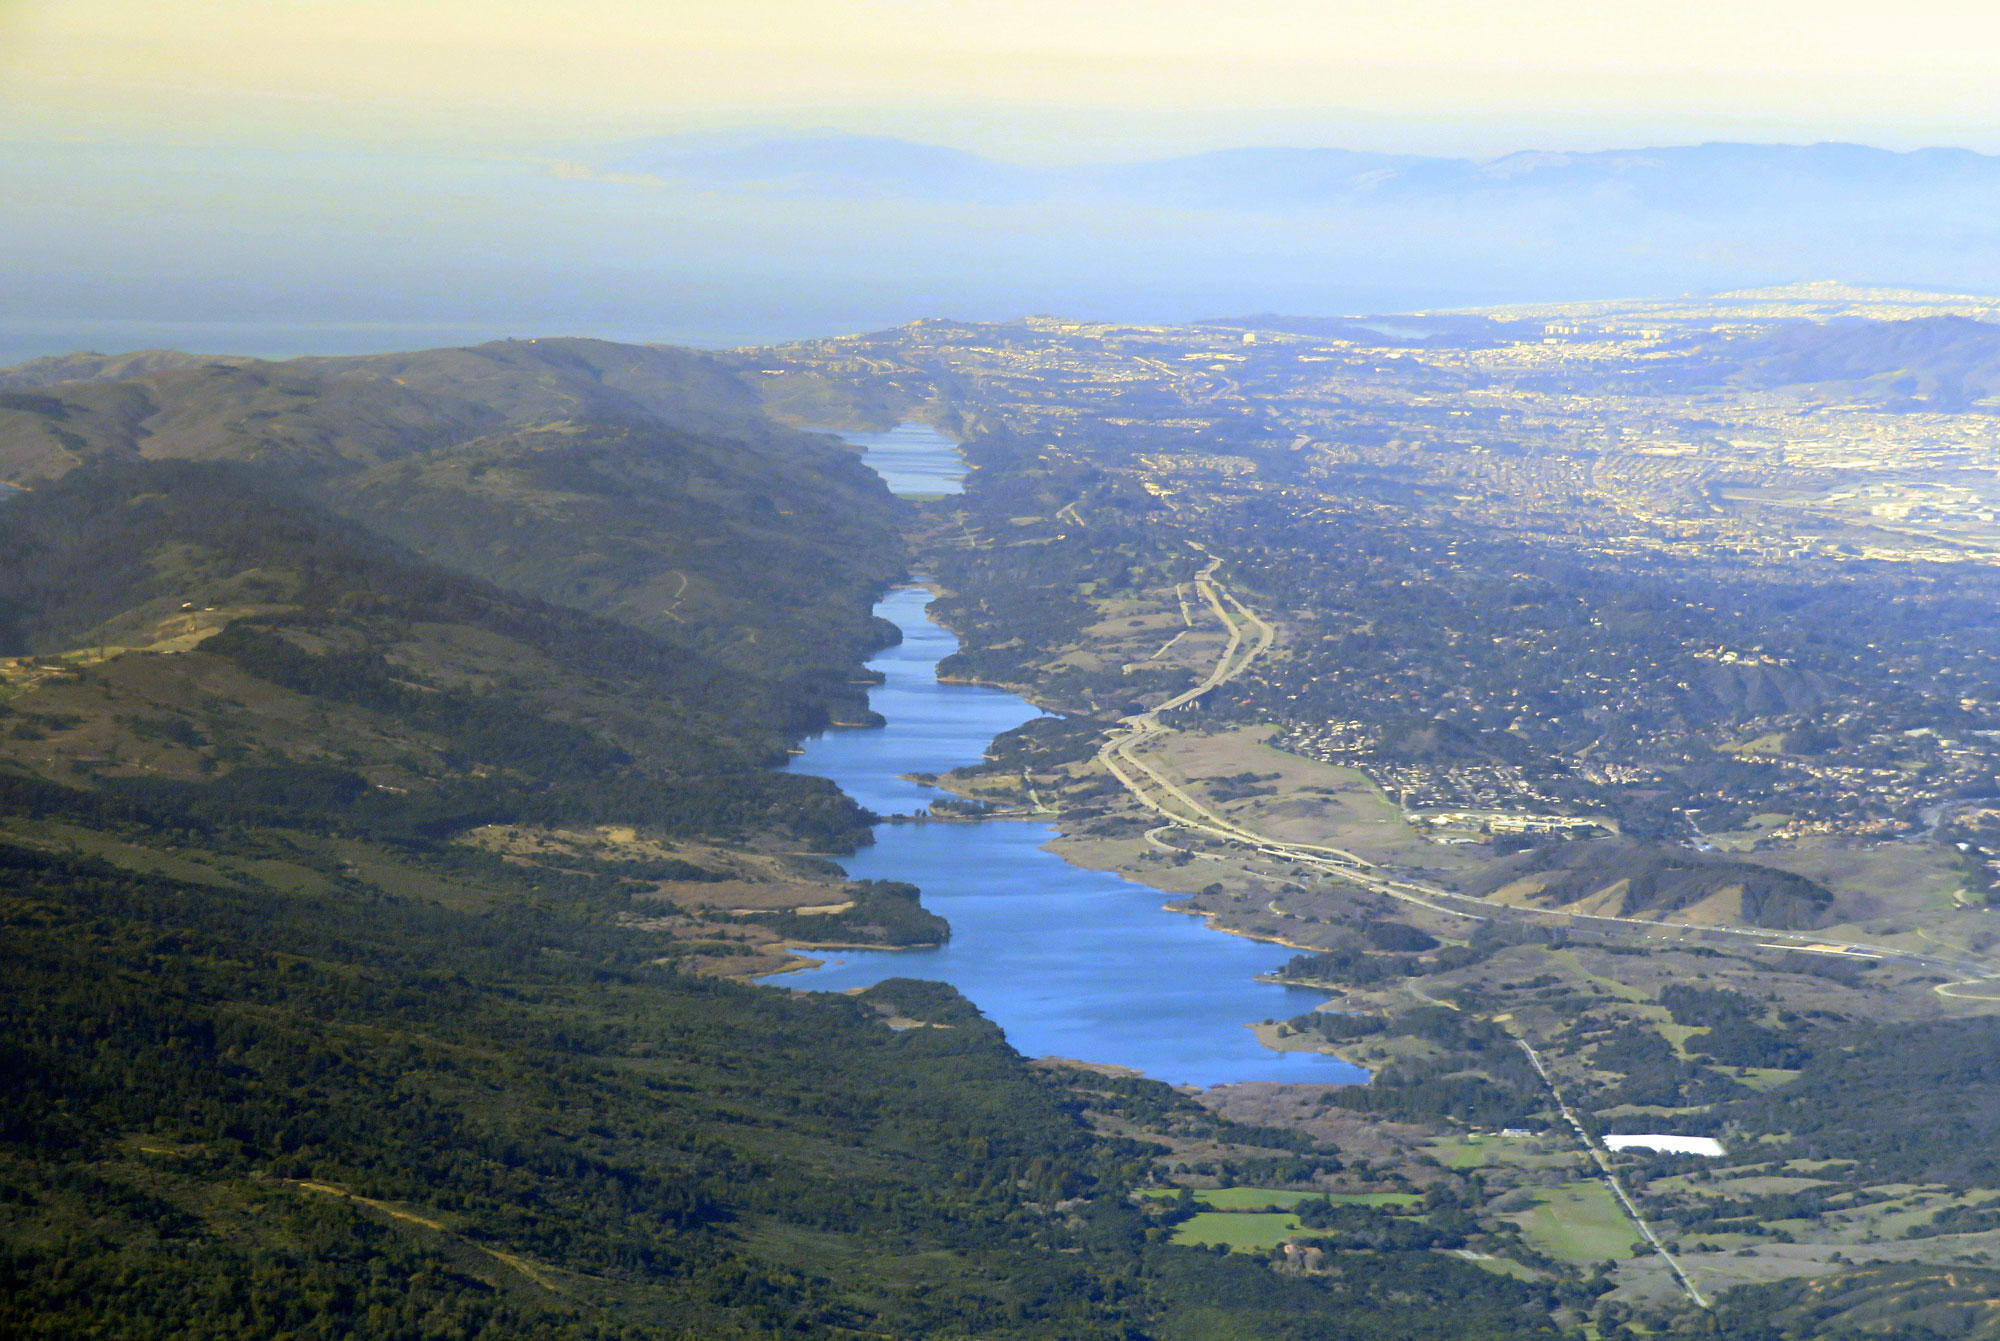 Aerial photograph of Crystal Springs Reservoir and San Andreas Lake, two elongated bodies of water that occur in the valley formed by the San Andreas Fault near the coast of Central California.